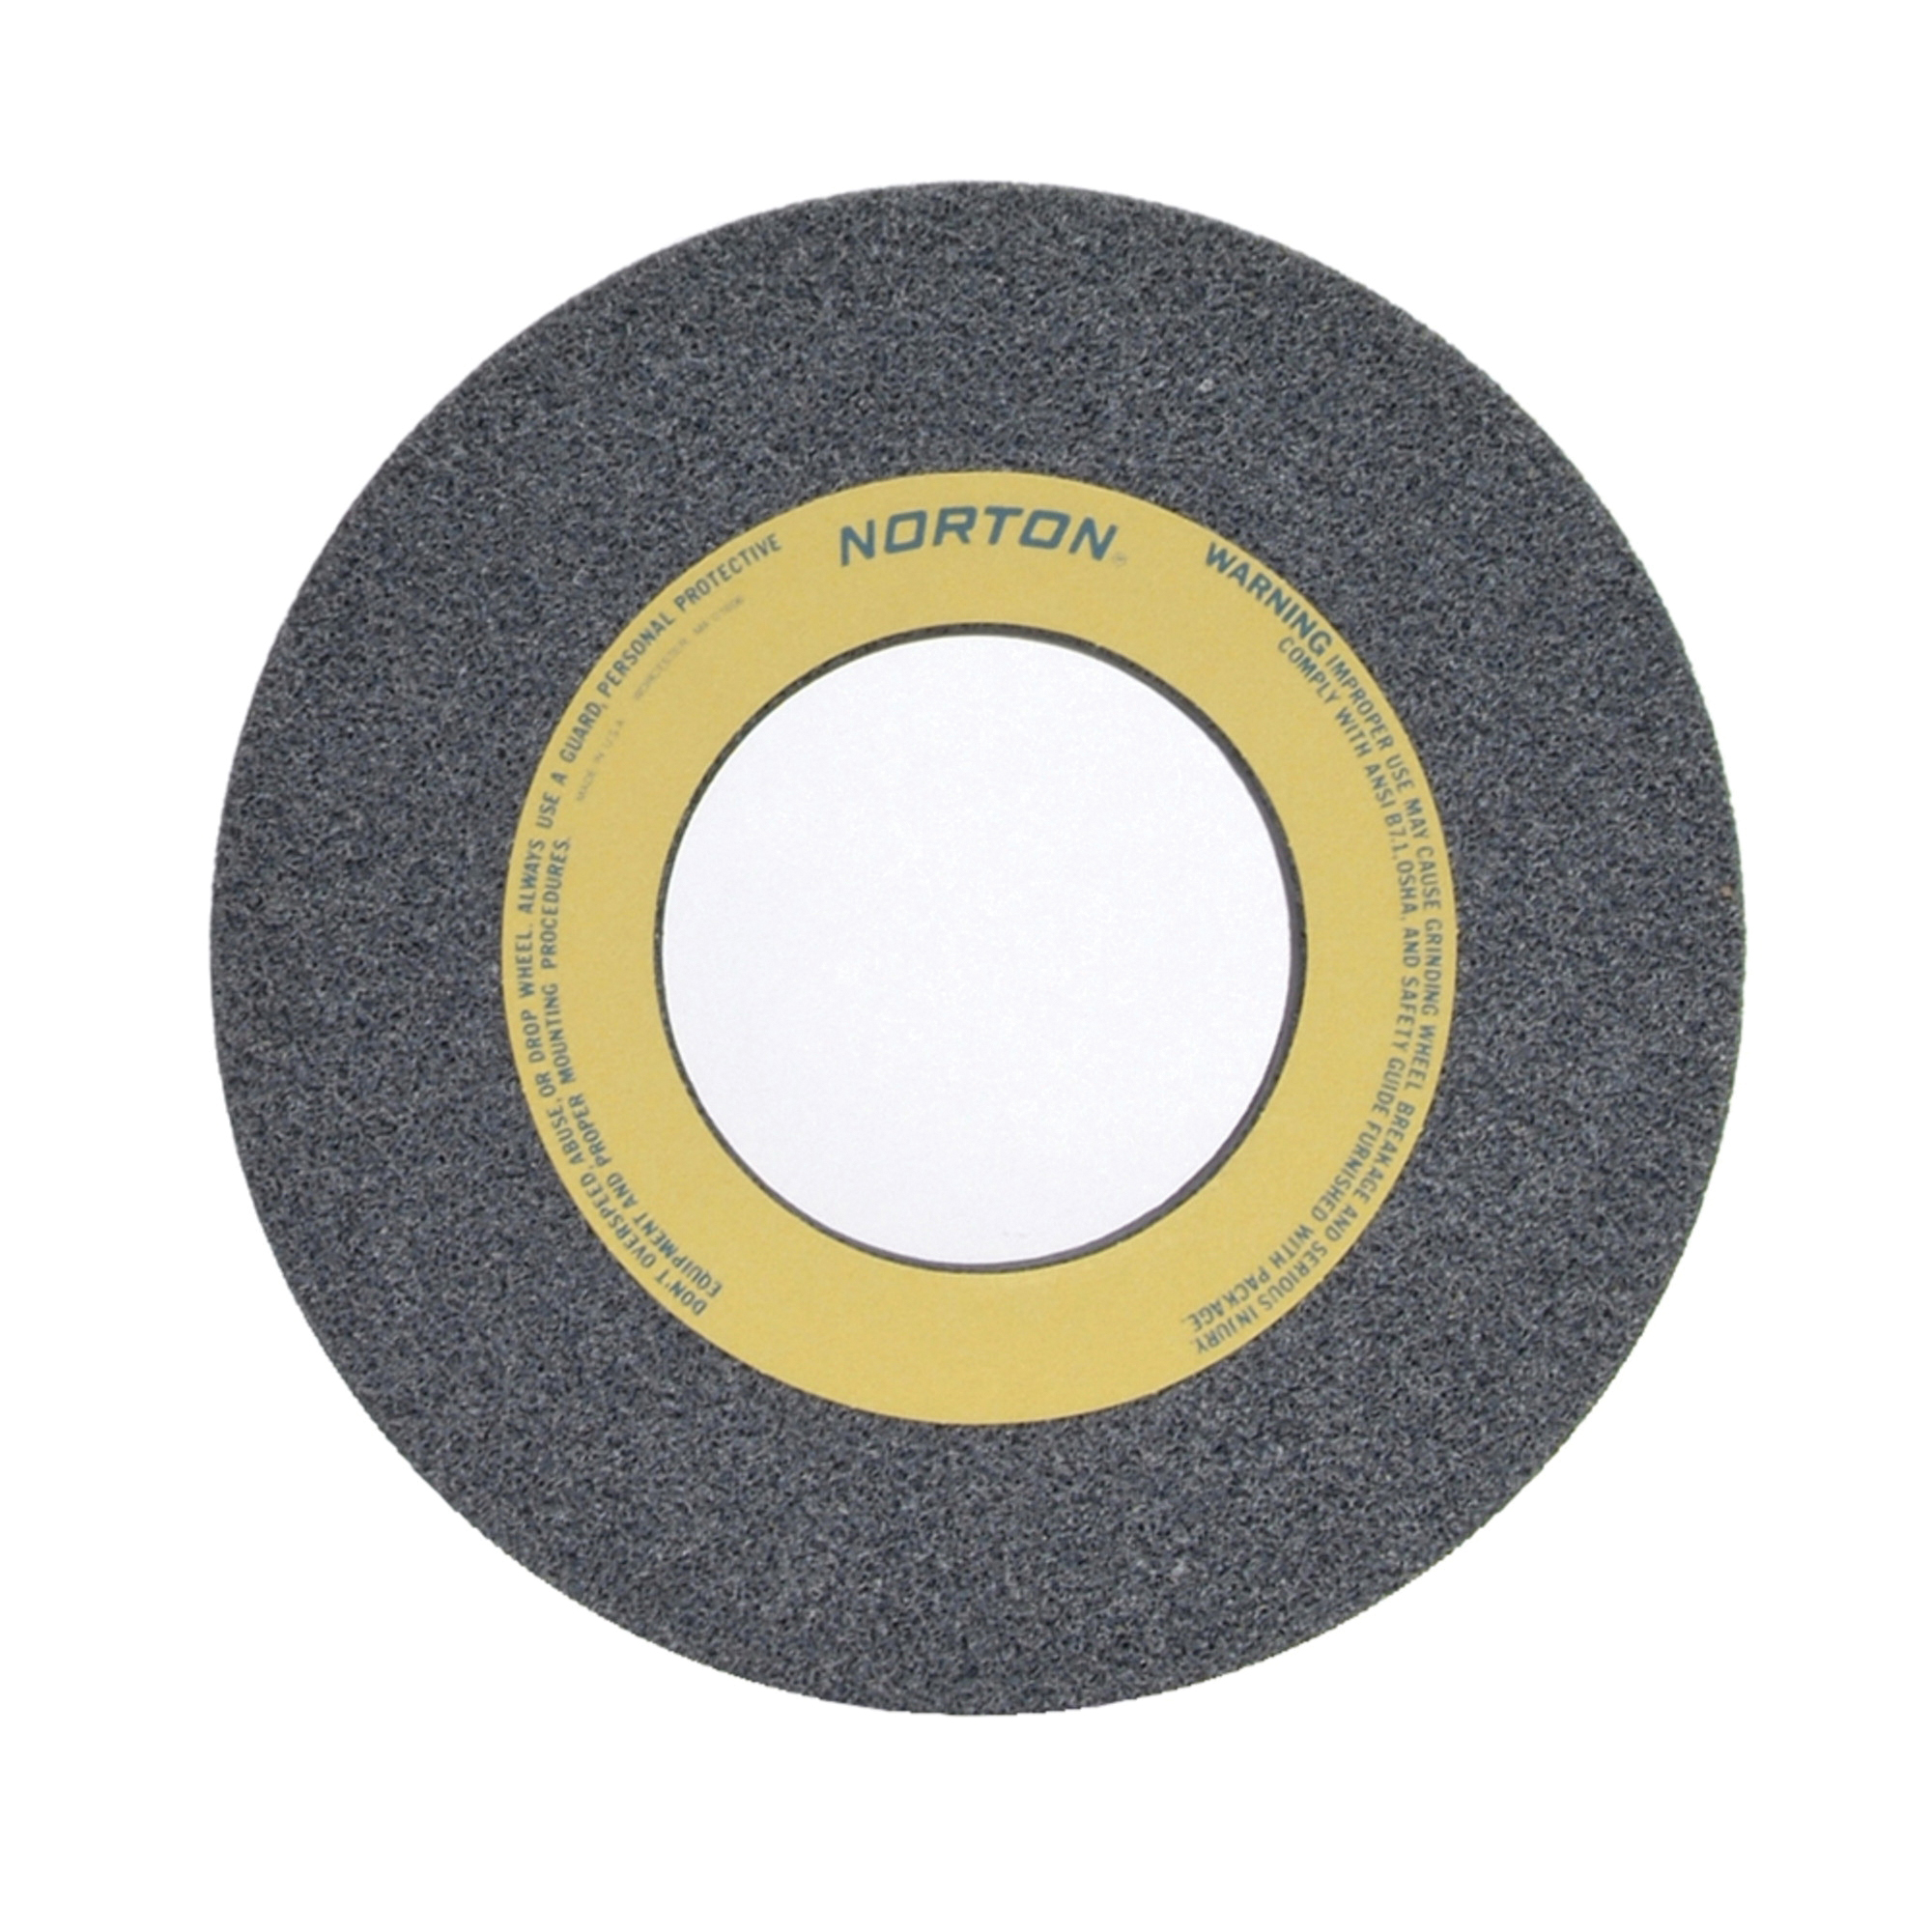 Norton® 66253263149 32A Straight Toolroom Wheel, 12 in Dia x 1-1/2 in THK, 5 in Center Hole, 60 Grit, Aluminum Oxide Abrasive